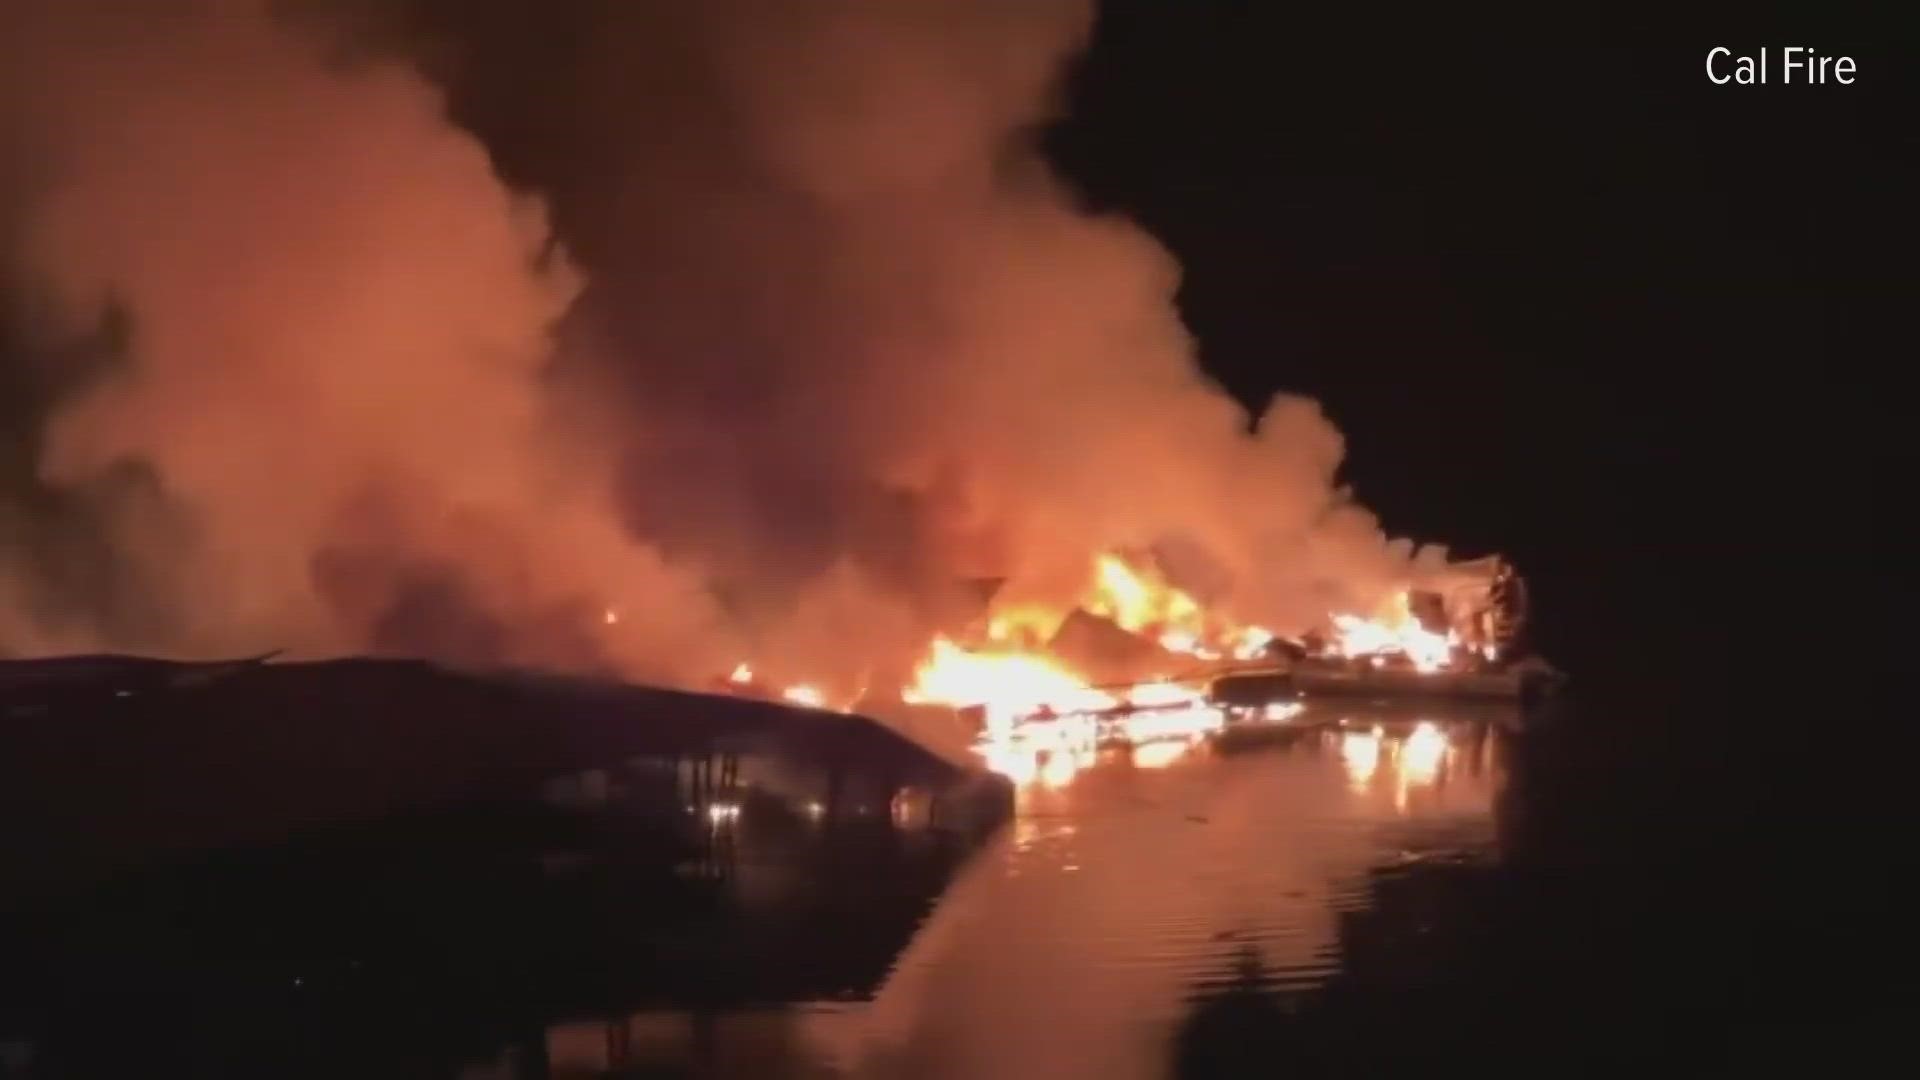 Officials say approximately 10-20 boats, jet skis, houseboats and the dock are on fire.